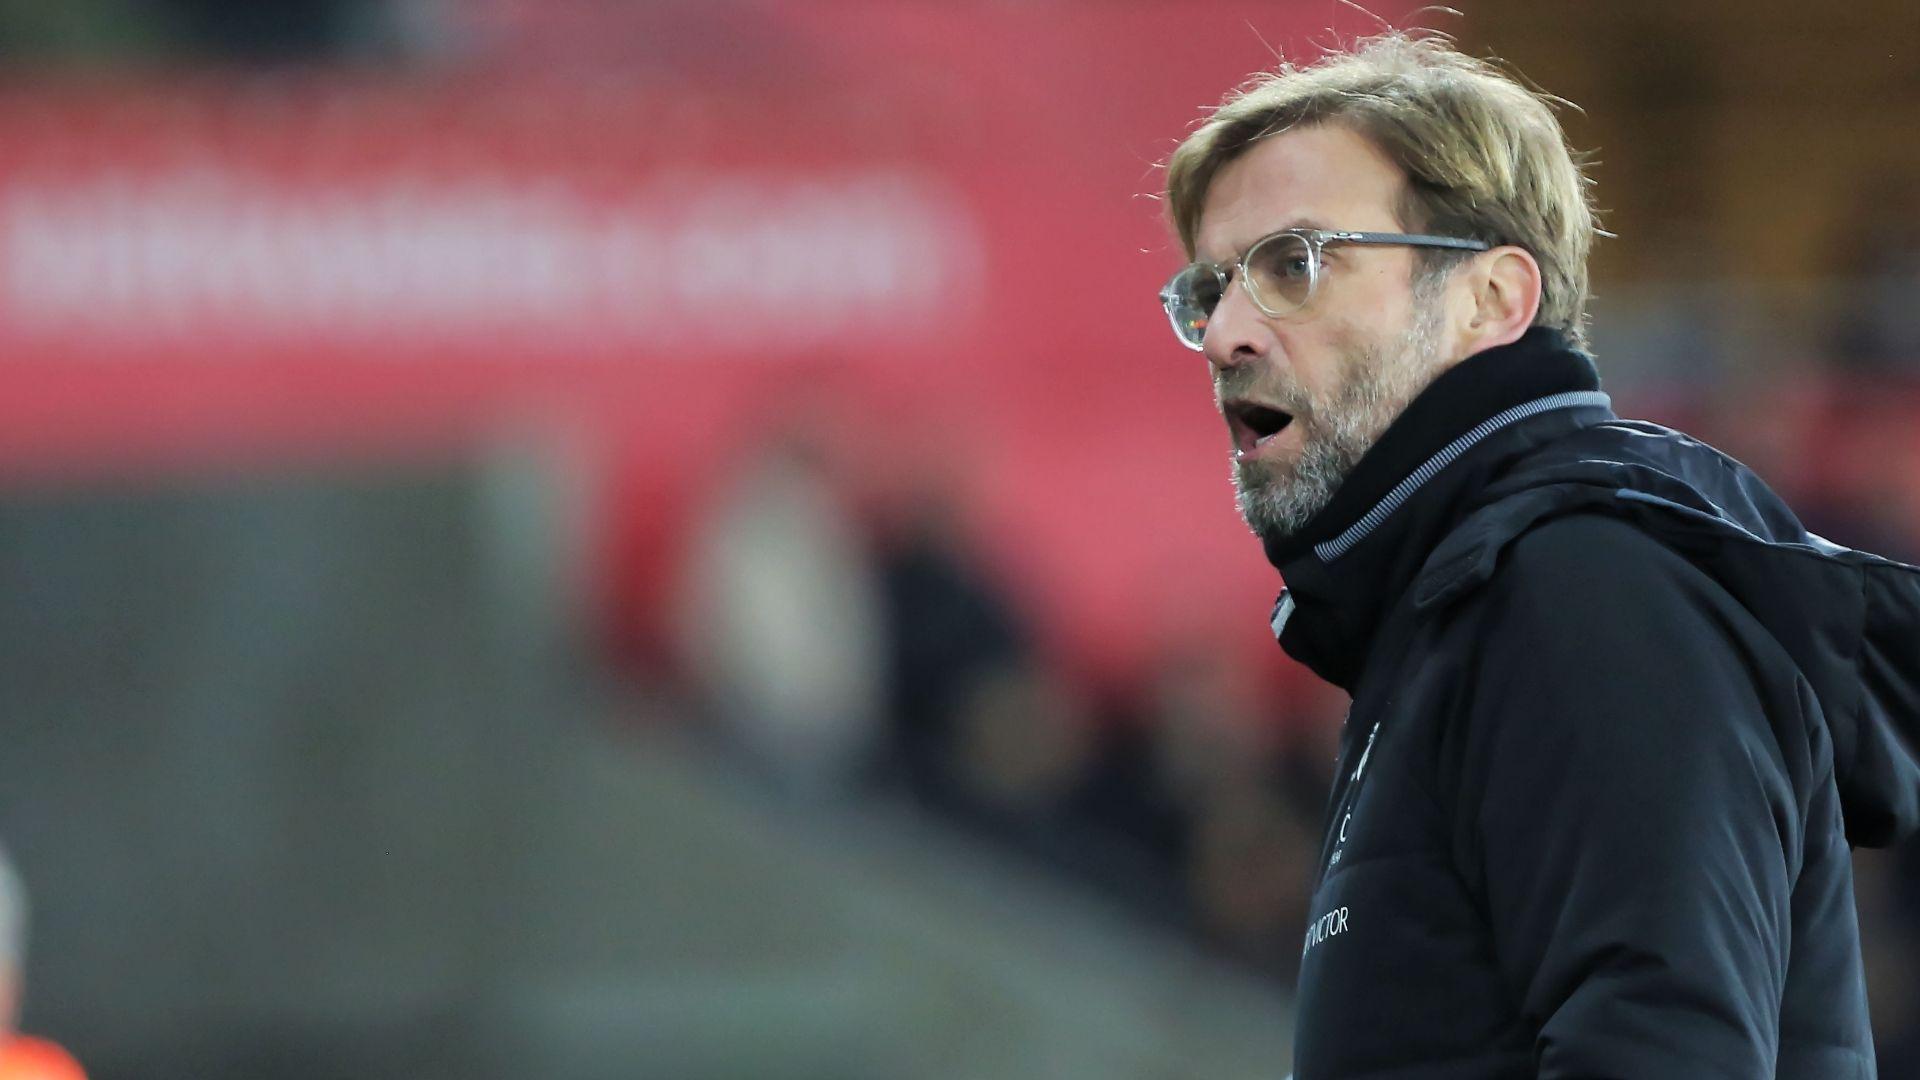 Liverpool defeat at Swansea throws up familiar doubts over Klopp's